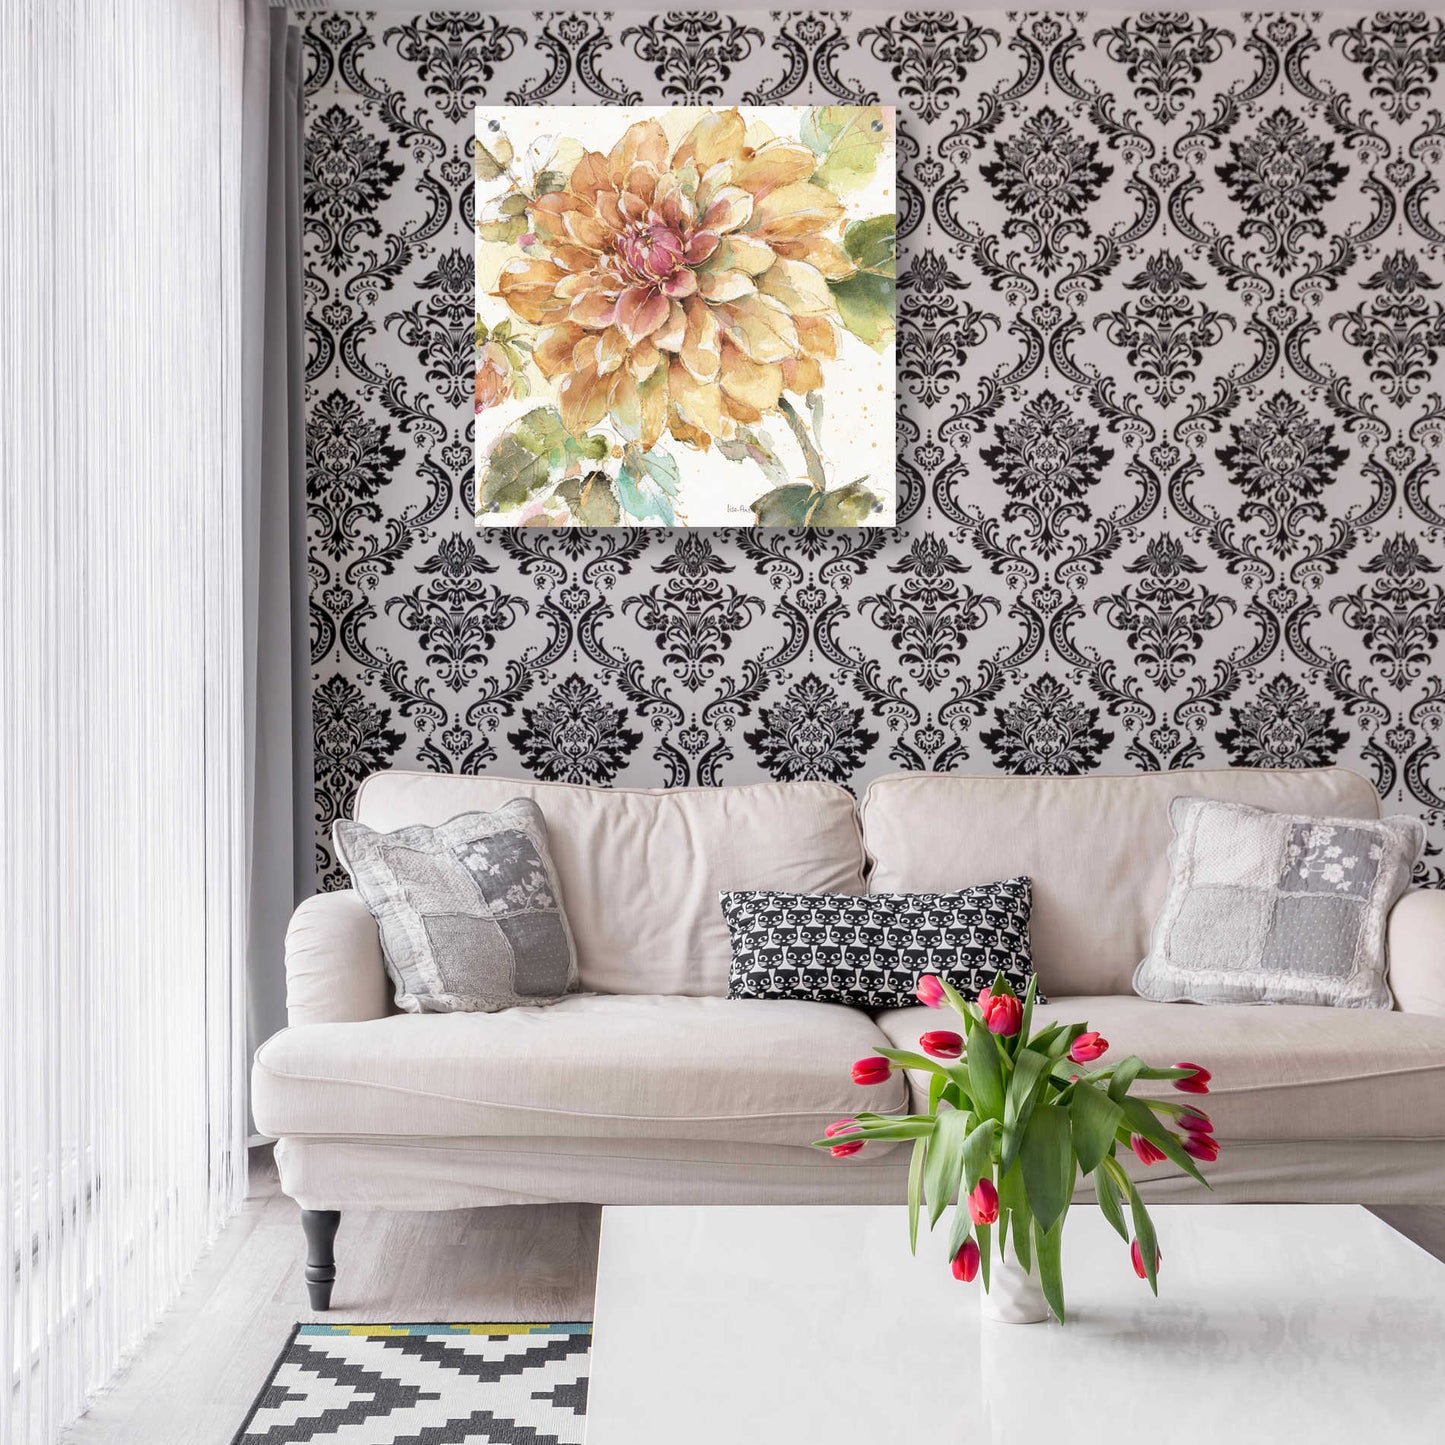 Epic Art 'Country Bloom V' by Lisa Audit, Acrylic Glass Wall Art,24x24